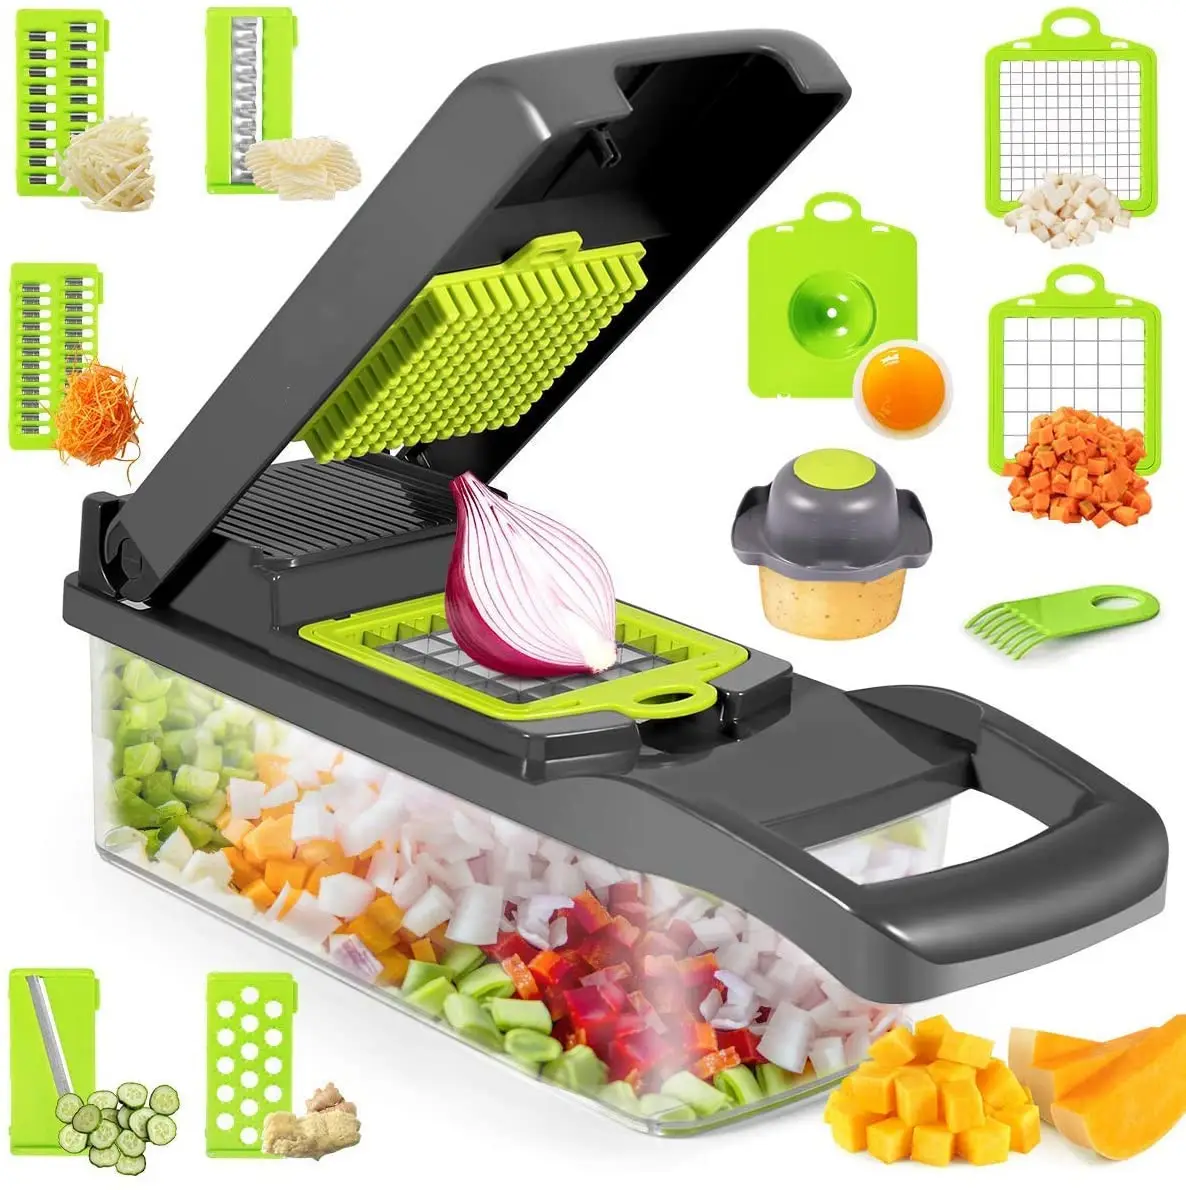 Slicer amazon hot sale new factory directly multifunction kitchen accessories 12 in 1 hand held vegetable chopper